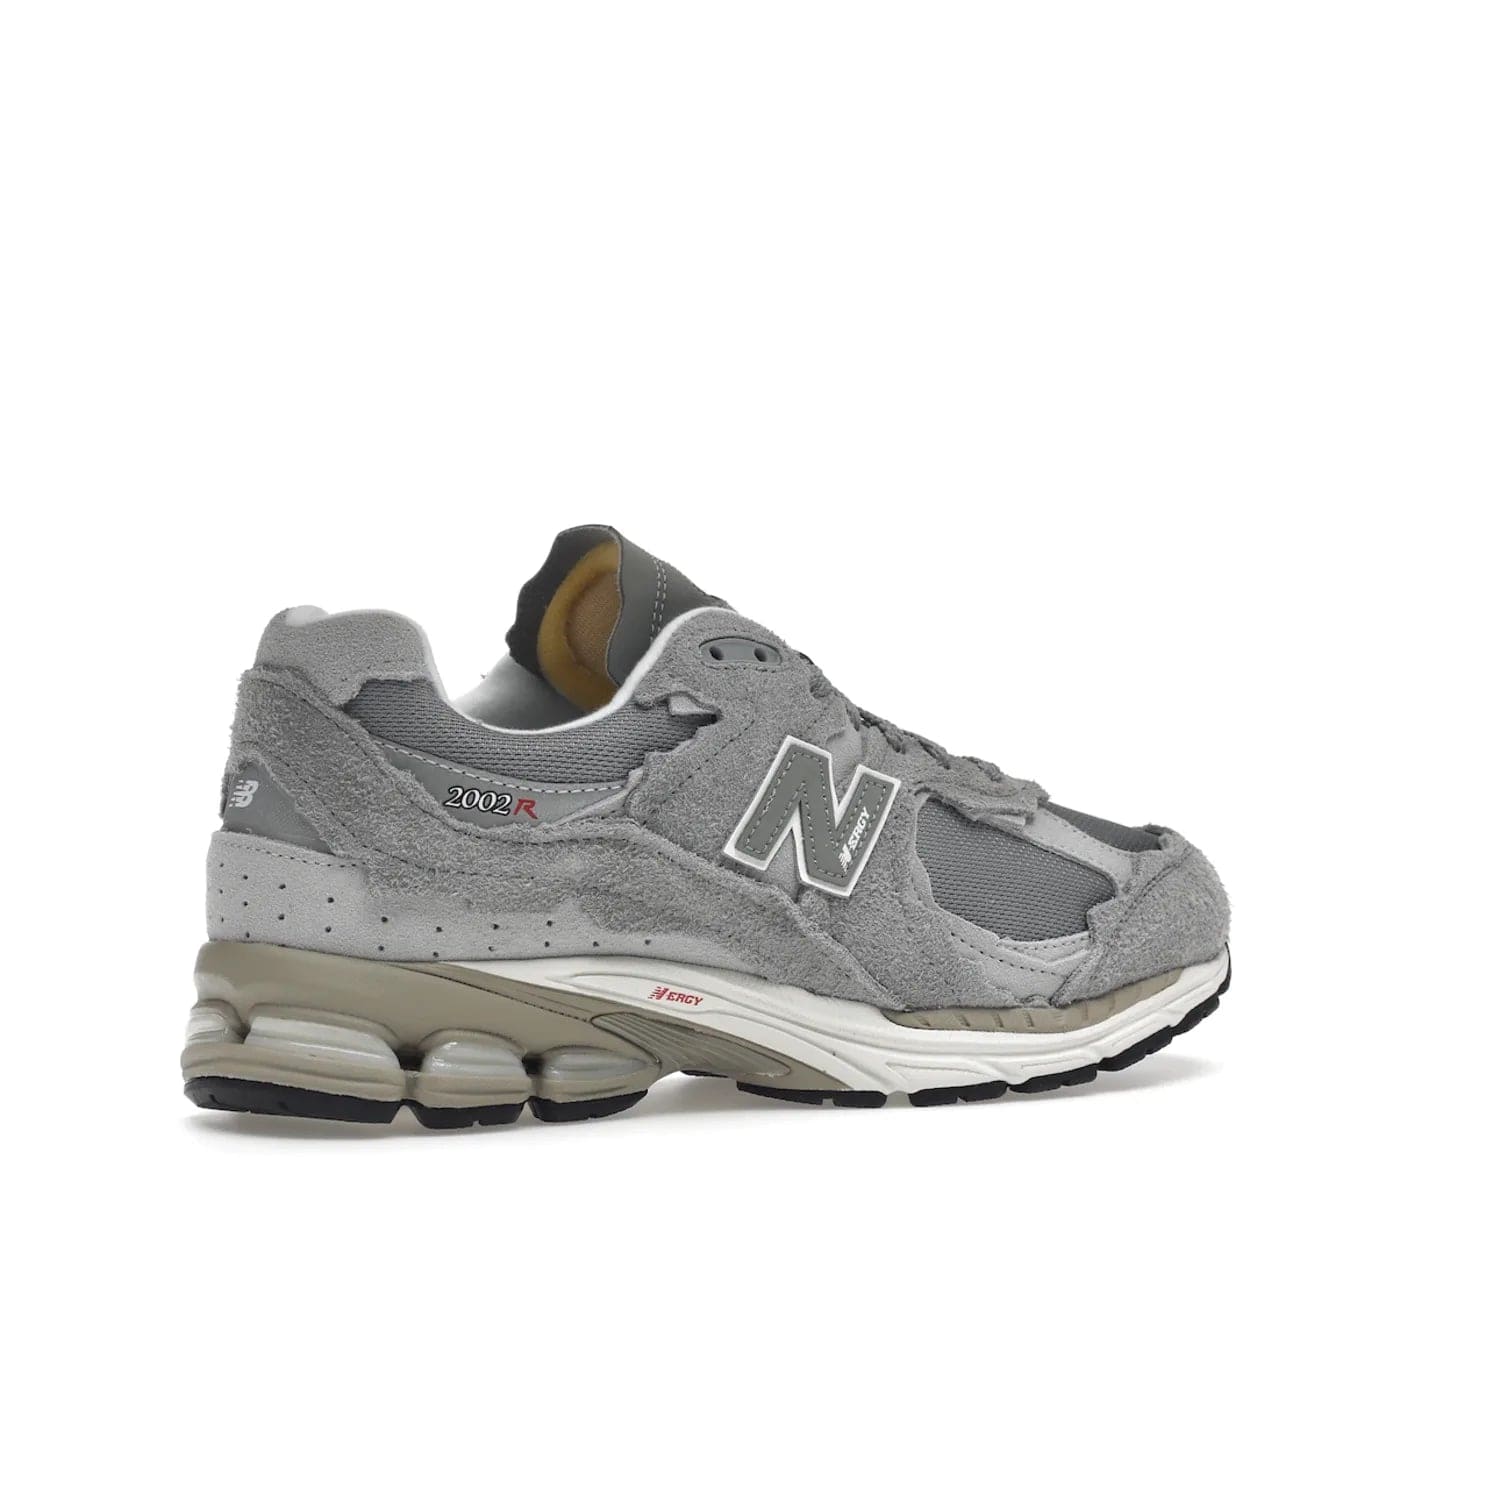 New Balance 2002R Protection Pack Grey - Image 34 - Only at www.BallersClubKickz.com - The New Balance 2002R Protection Pack Grey provides superior protection and all-day comfort. It features a blend of synthetic and mesh materials, foam midsole, rubber outsole, and a toe cap and heel counter. Show off the classic "N" logo and "2002R" lettering. Get a pair on February 14, 2023 for protection and style.